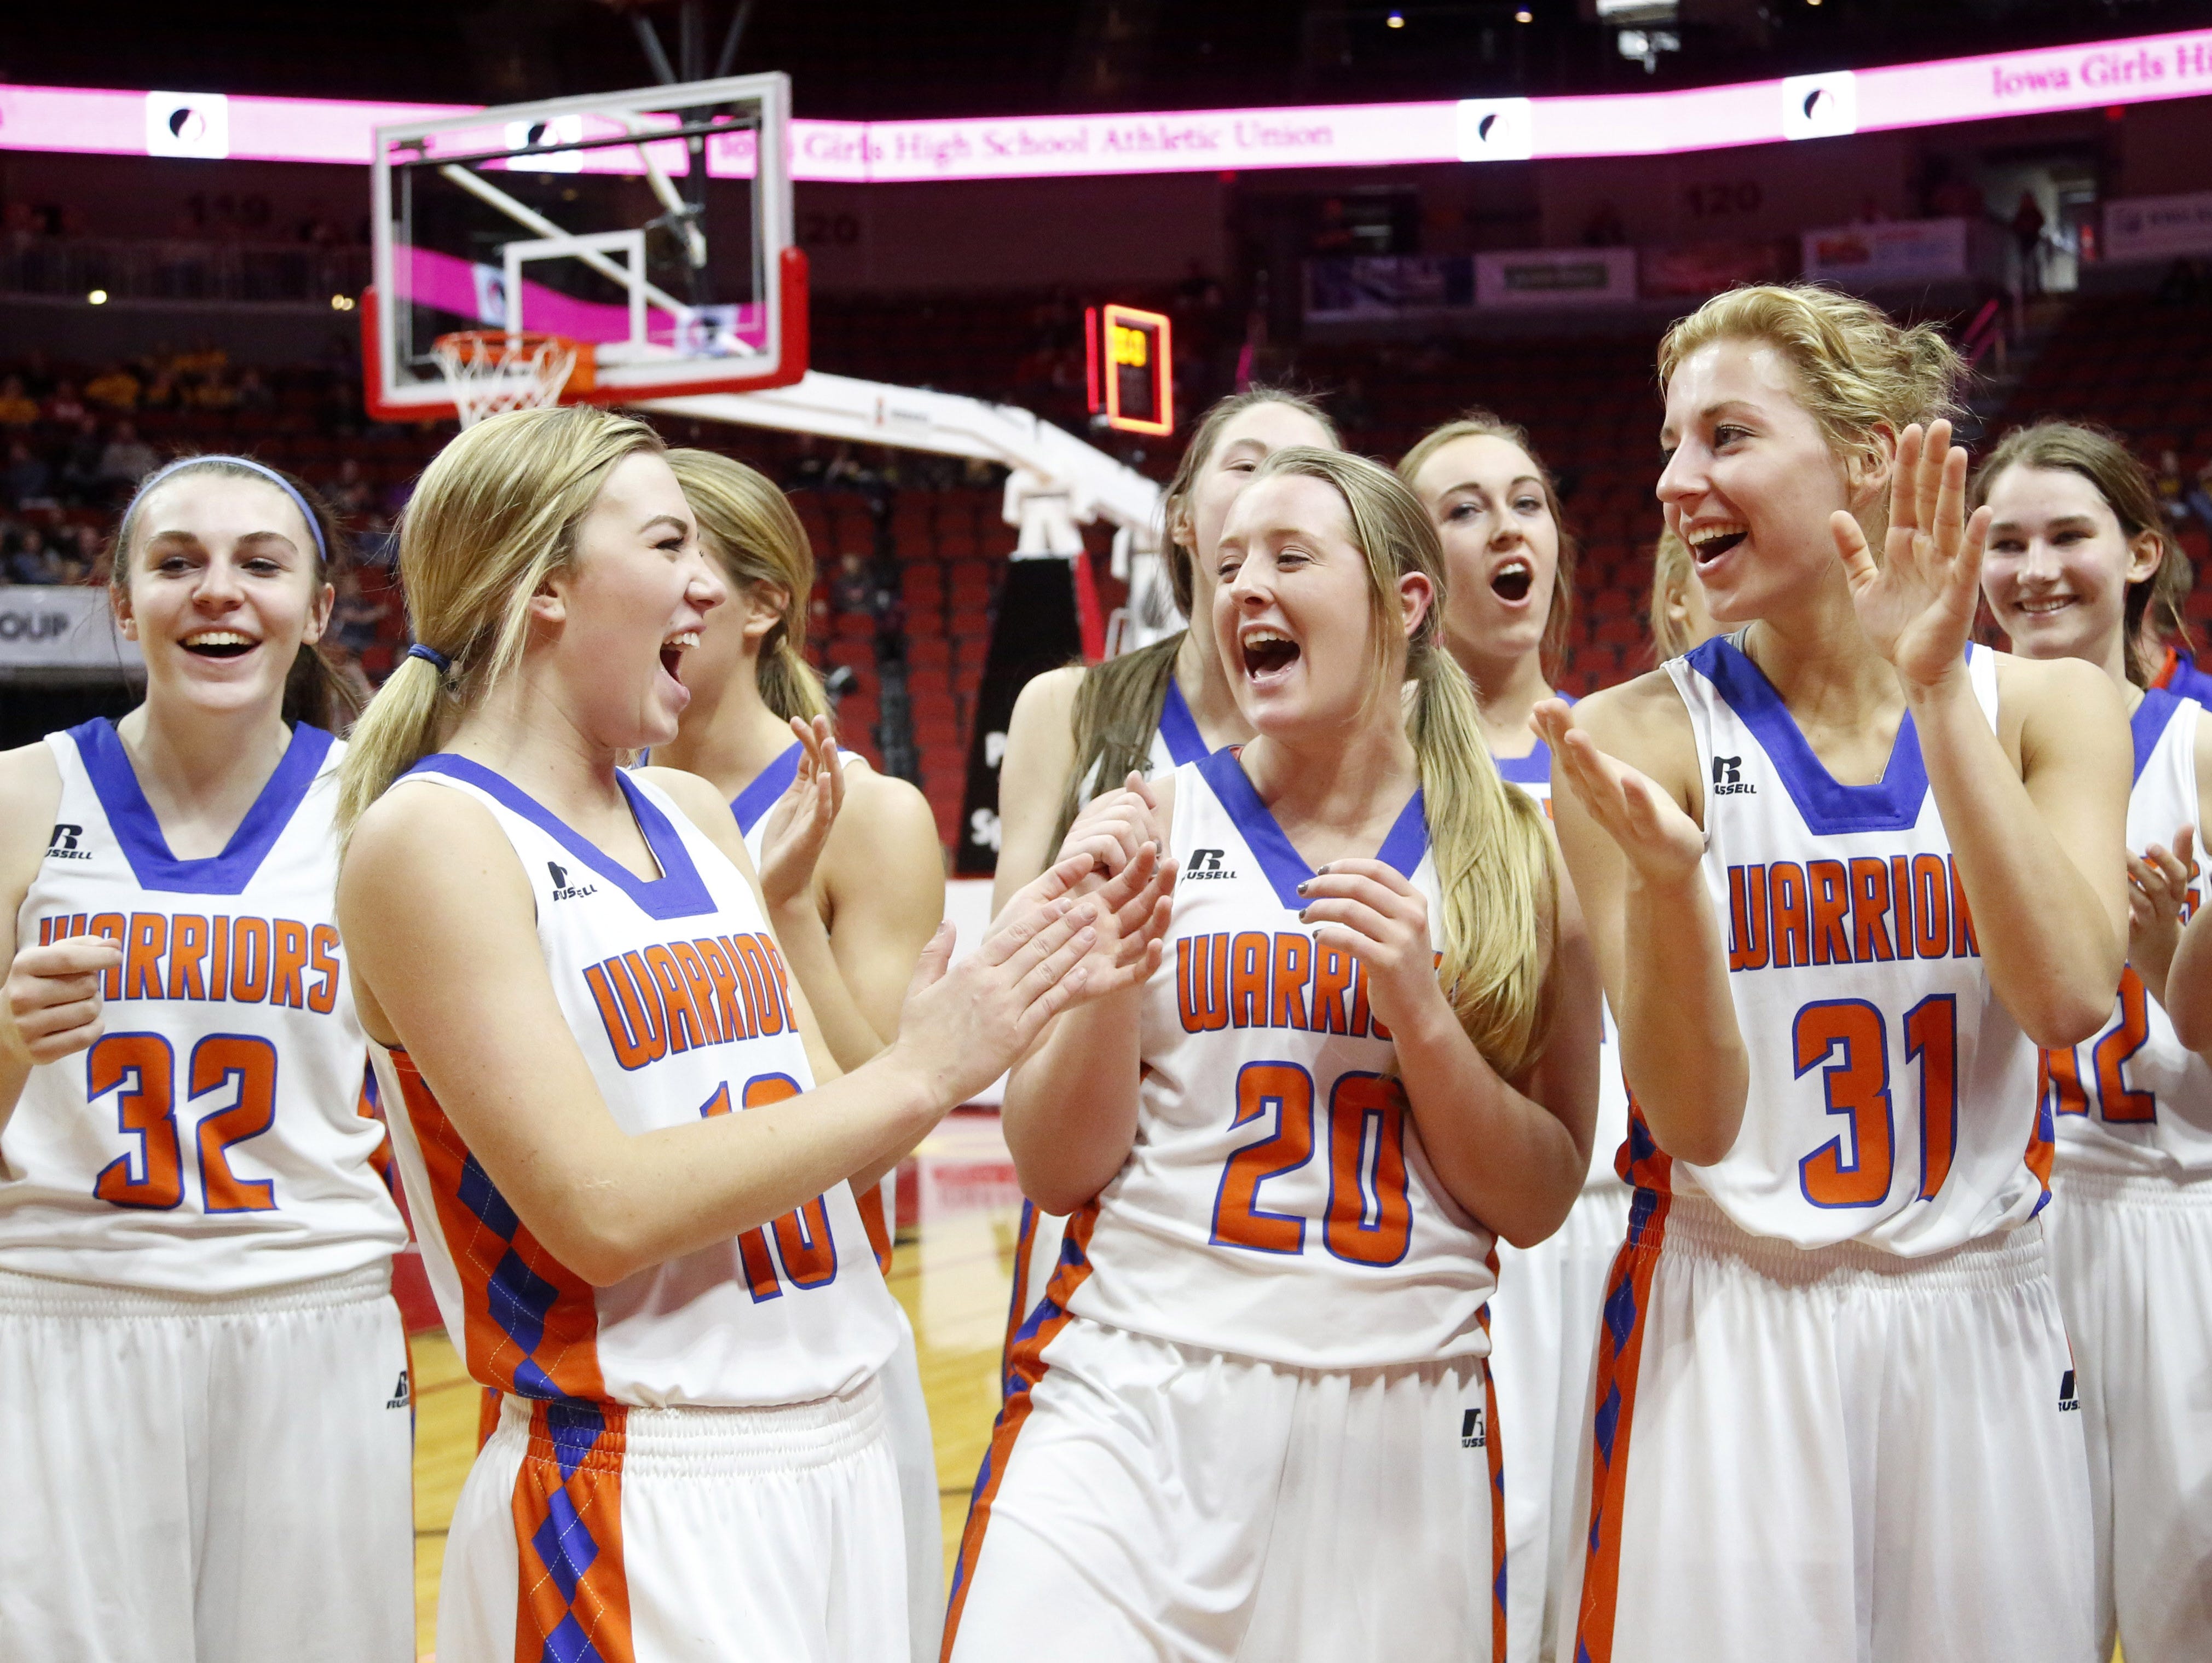 Thursday updates from the Iowa girls basketball tournament USA TODAY